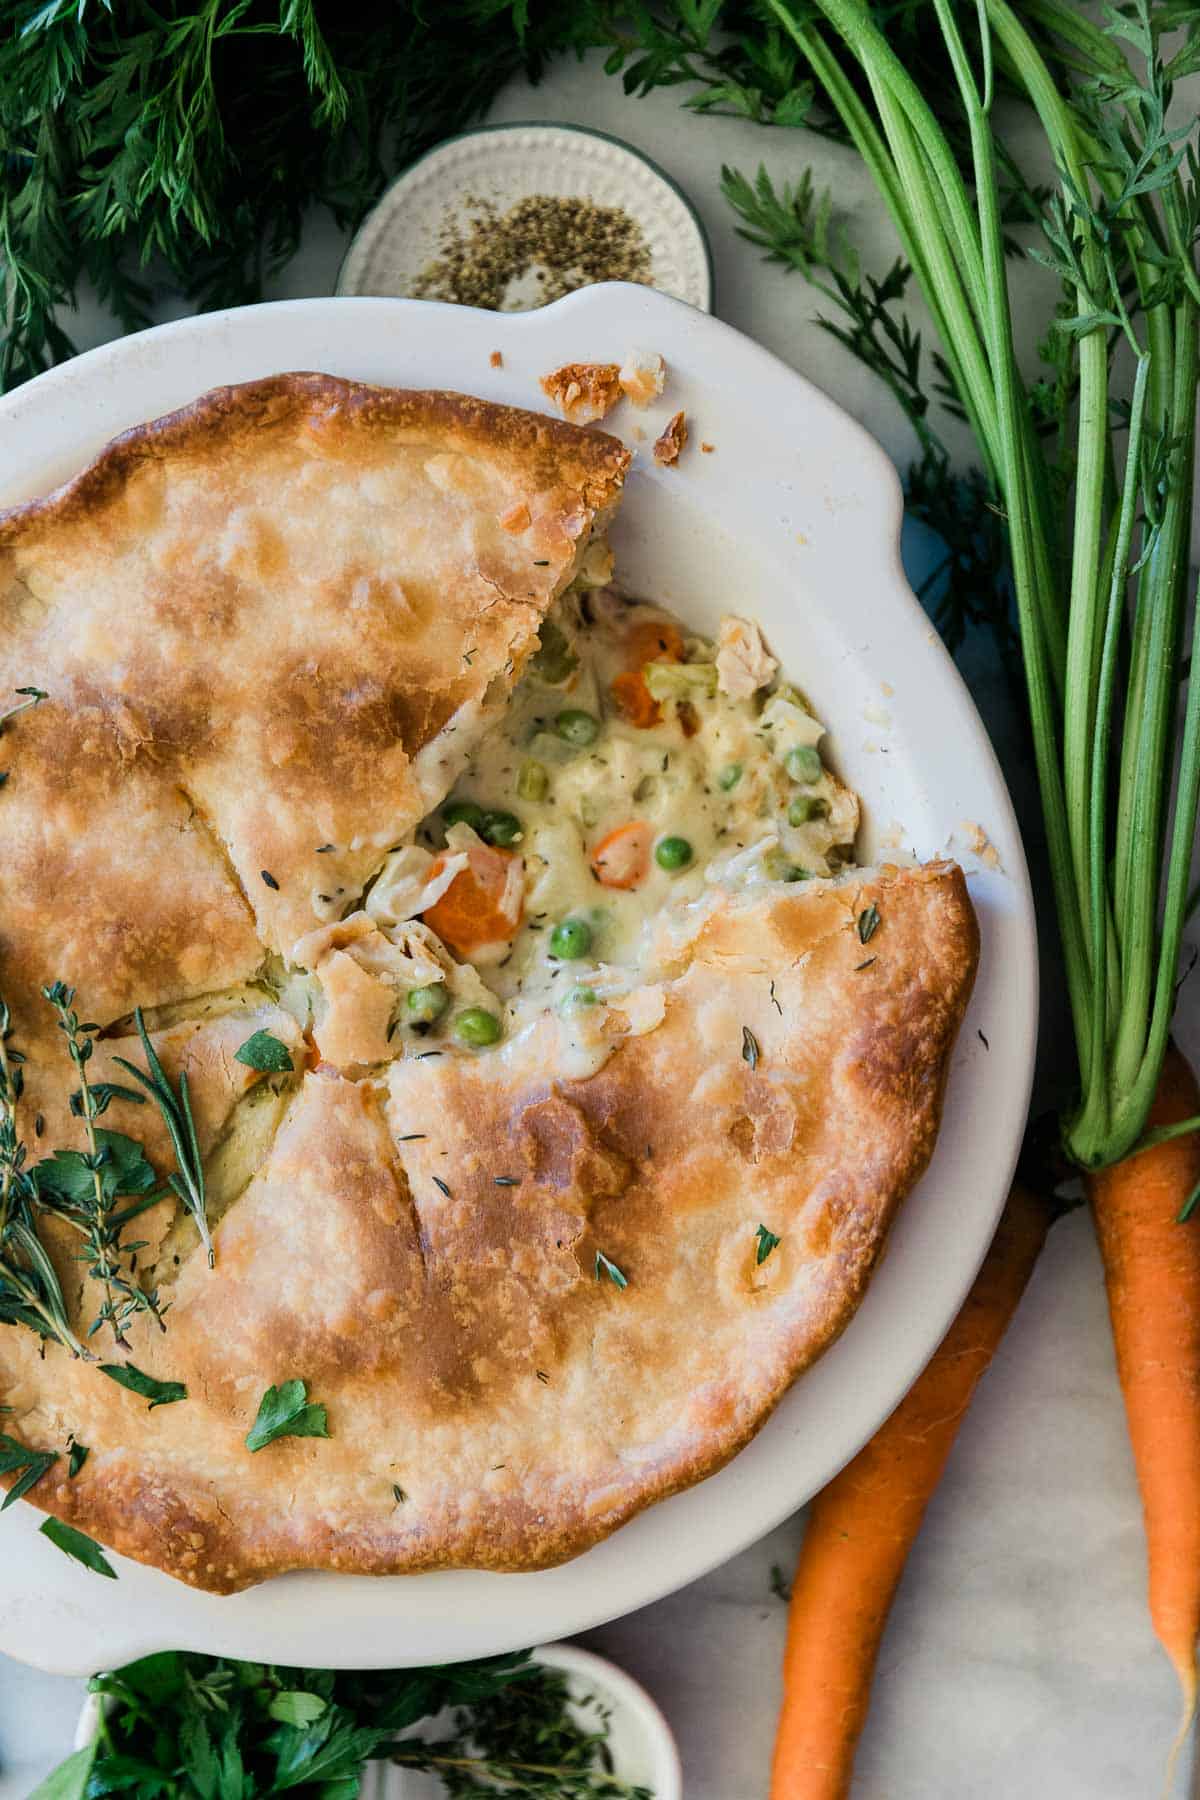 Pot pie recipe in a white pie pan. There are carrots to the side.